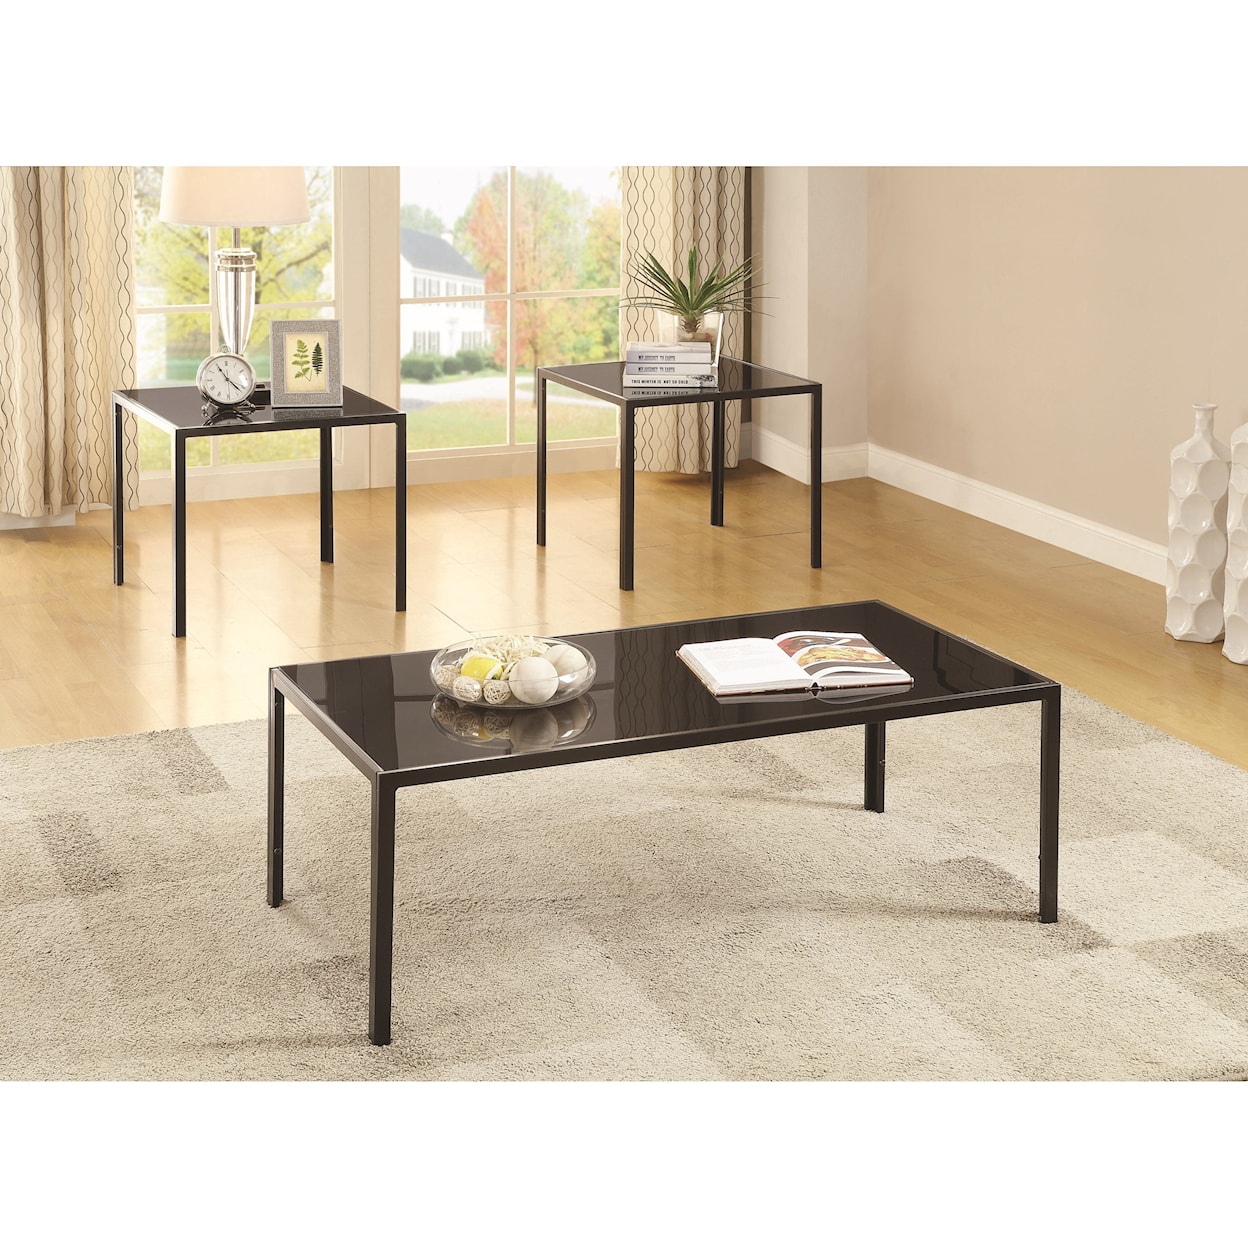 Coaster Occasional Table Sets PEWTER BLACK 3 PC OCCASIONAL SET |